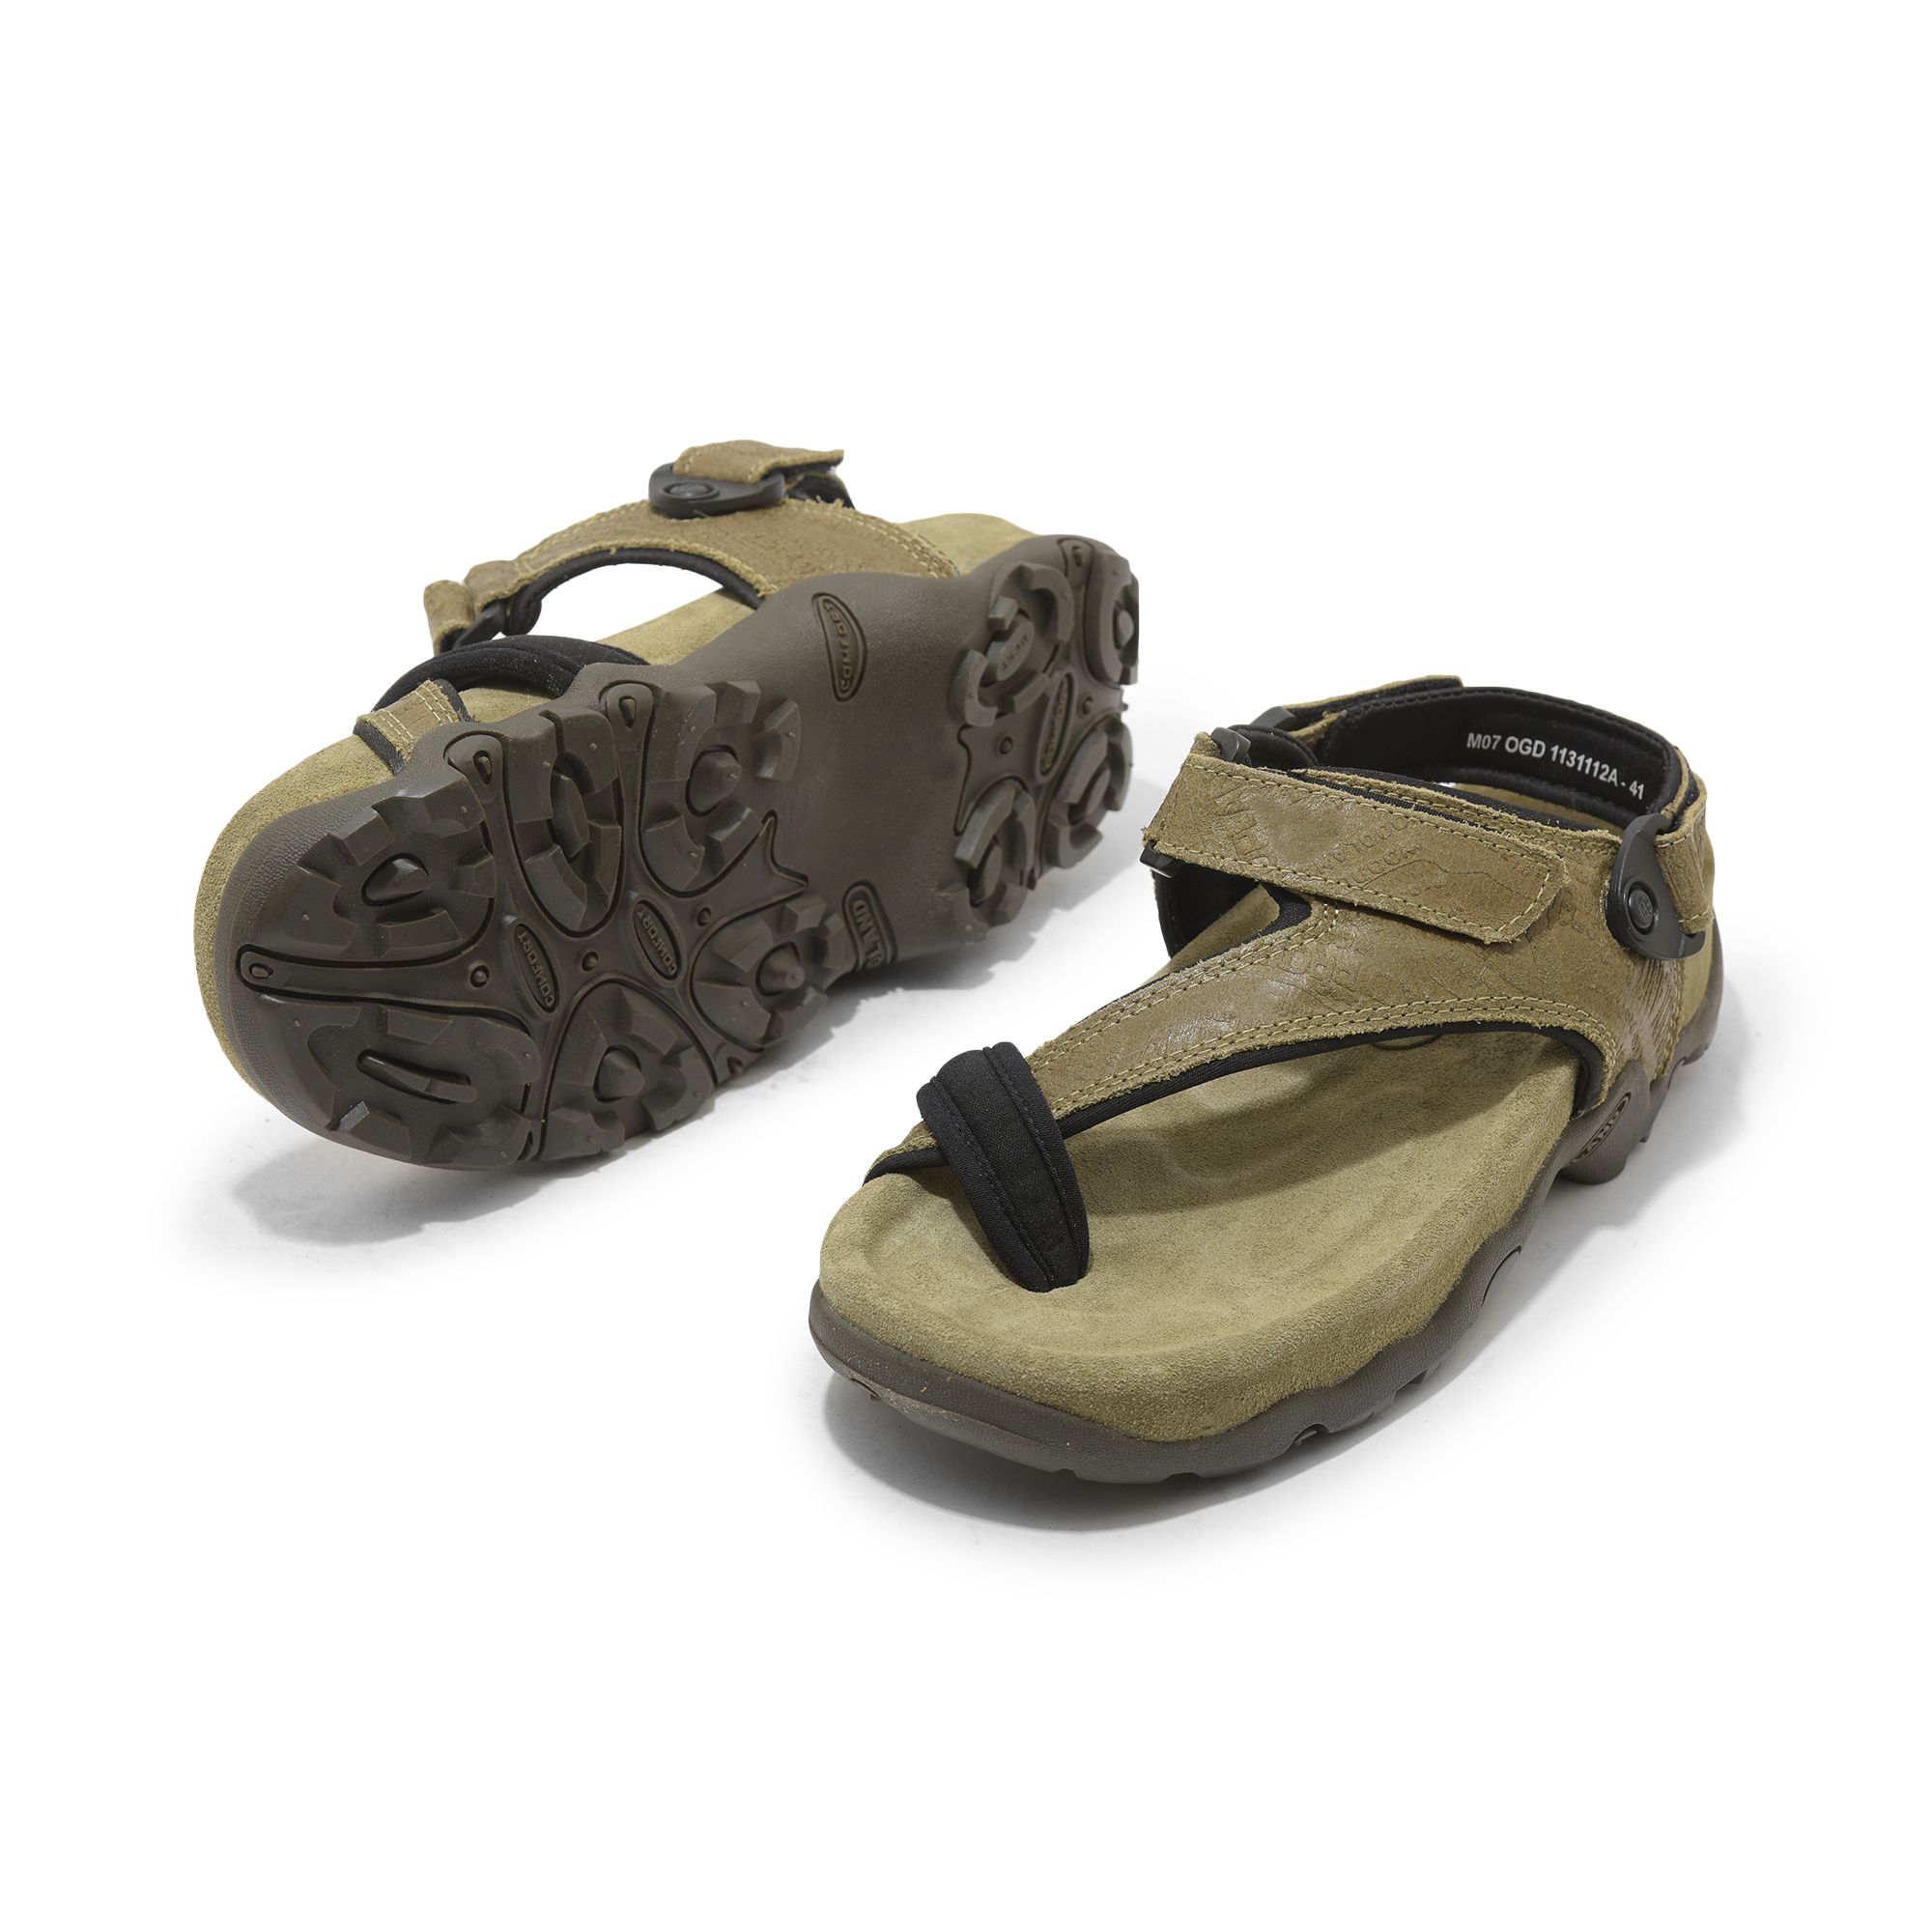 Buy Woodland Tan Floater Sandals for Men at Best Price @ Tata CLiQ